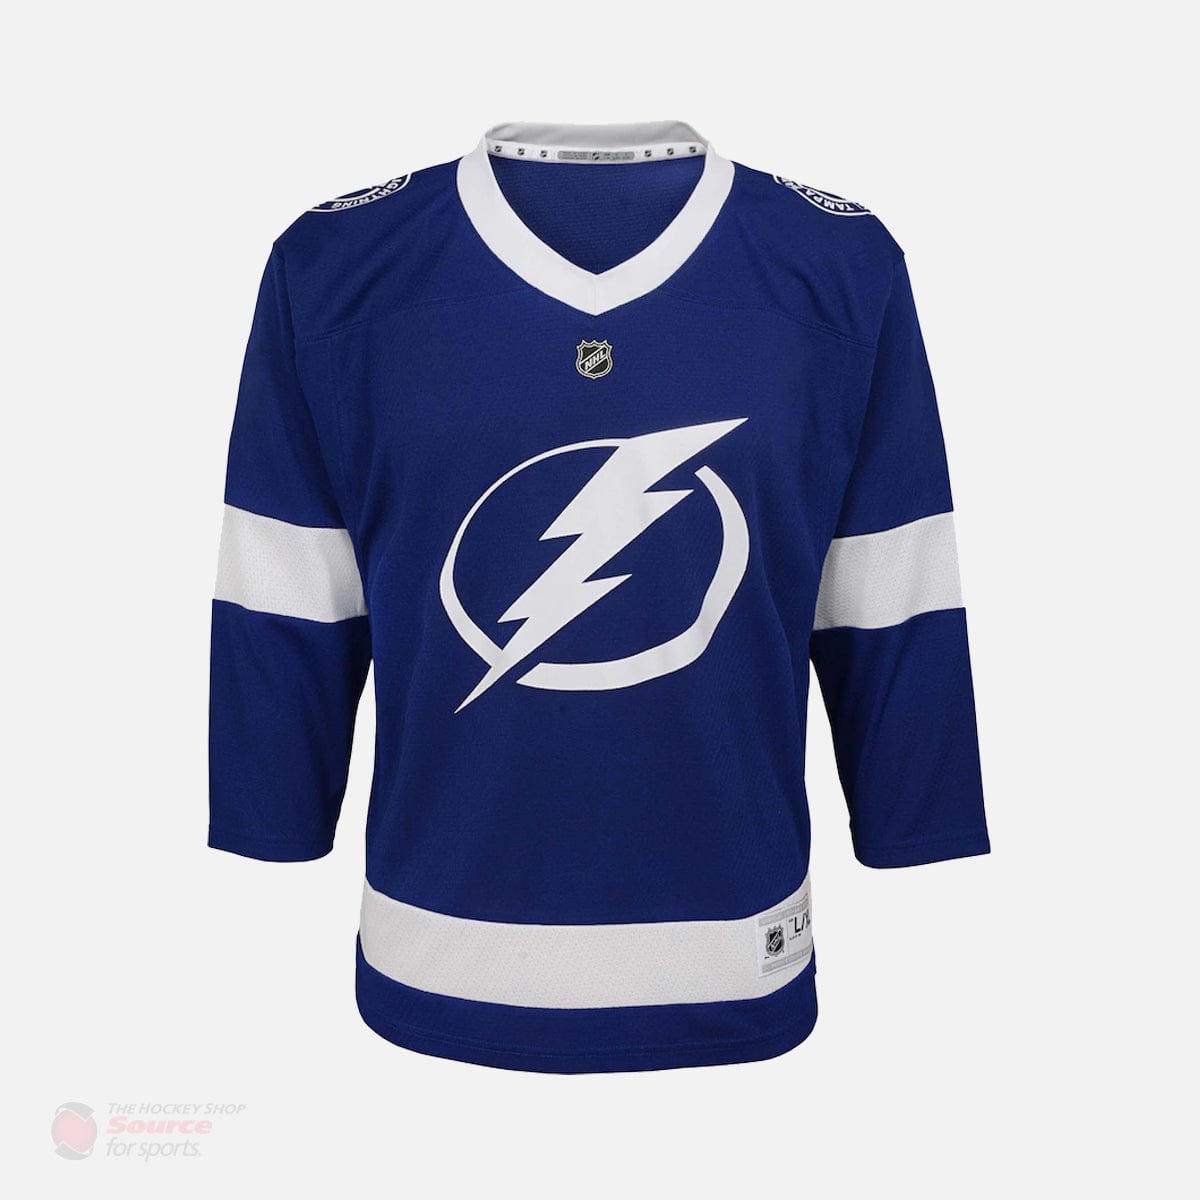 Tampa Bay Lightning Home Outer Stuff Replica Youth Jersey